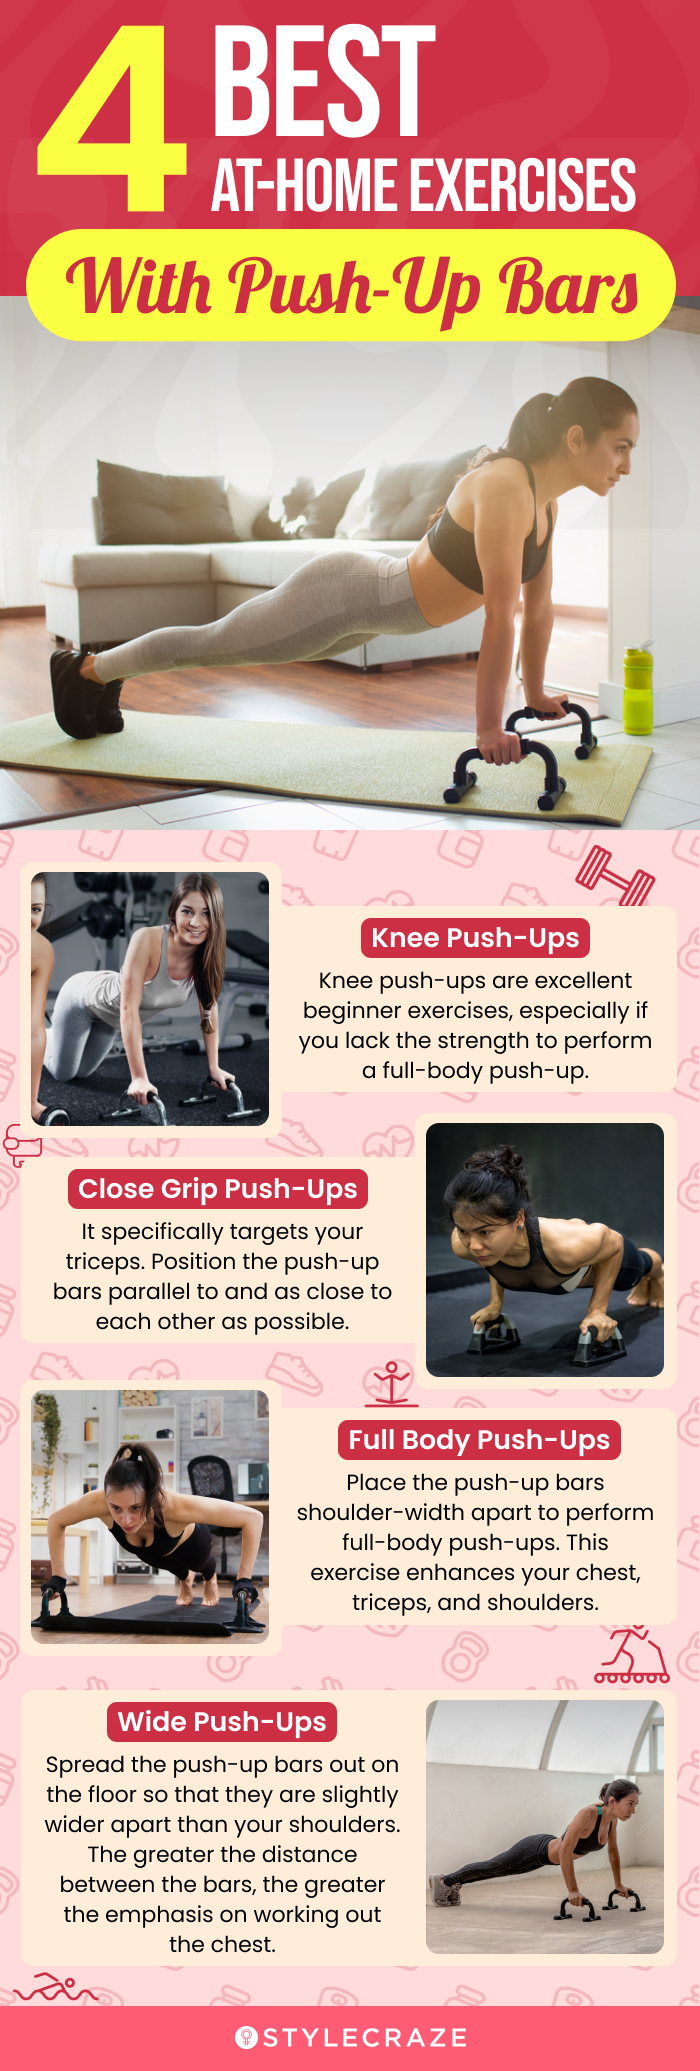 4 Best Home Exercises With Push-Up Bars (infographic)